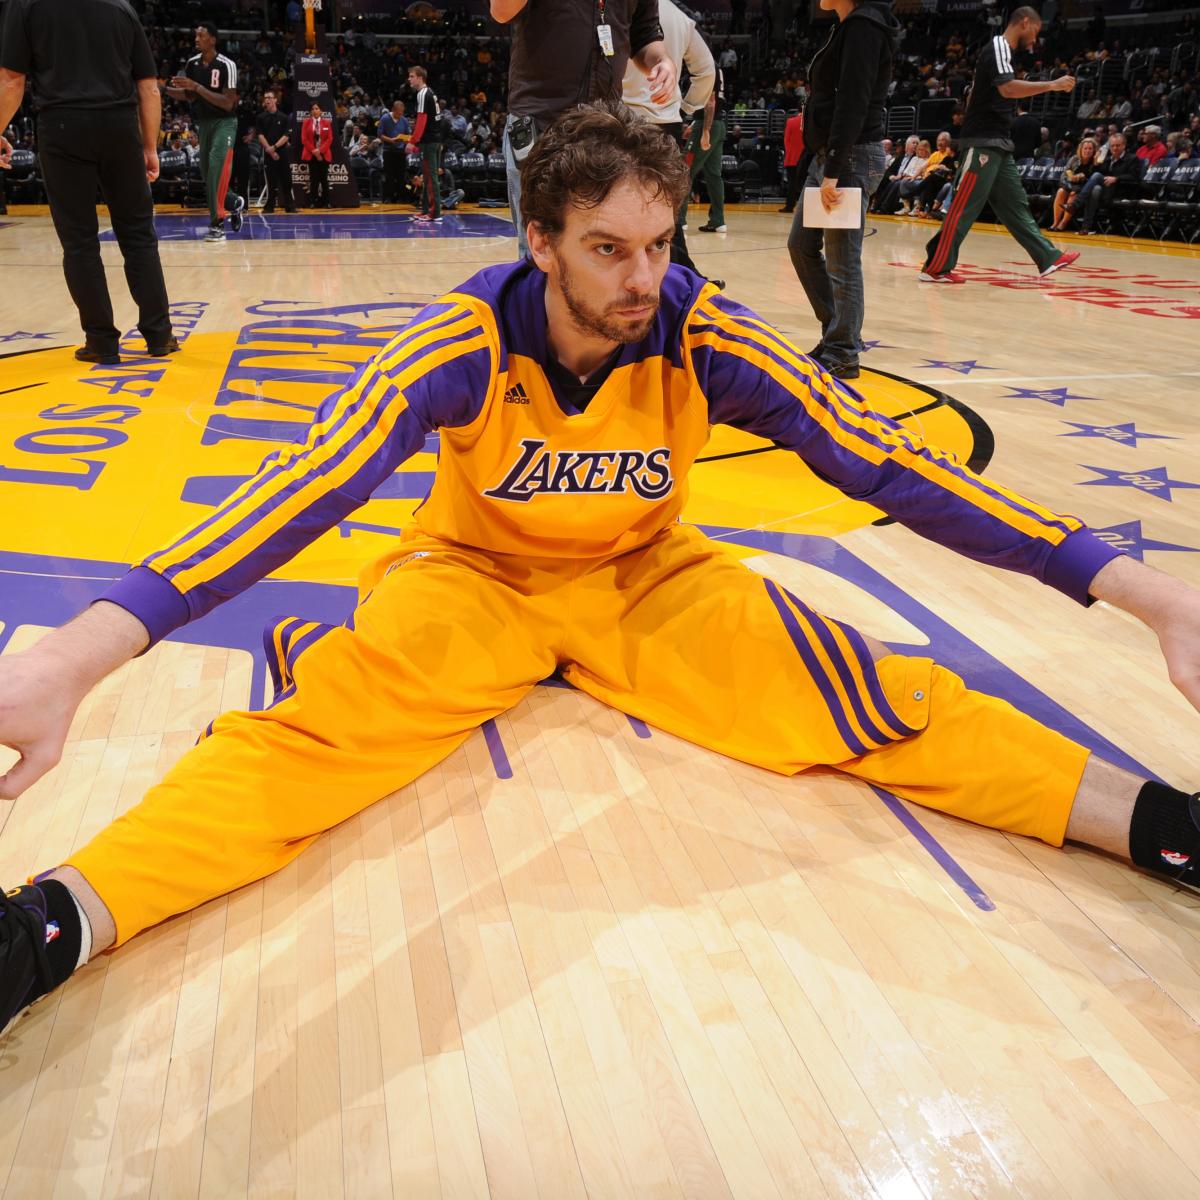 Los Angeles Lakers' Pau Gasol poses for photos during the basketball team's  media day at the Lakers training facility in El Segundo, California on  September 25, 2010. The Lakers will try to